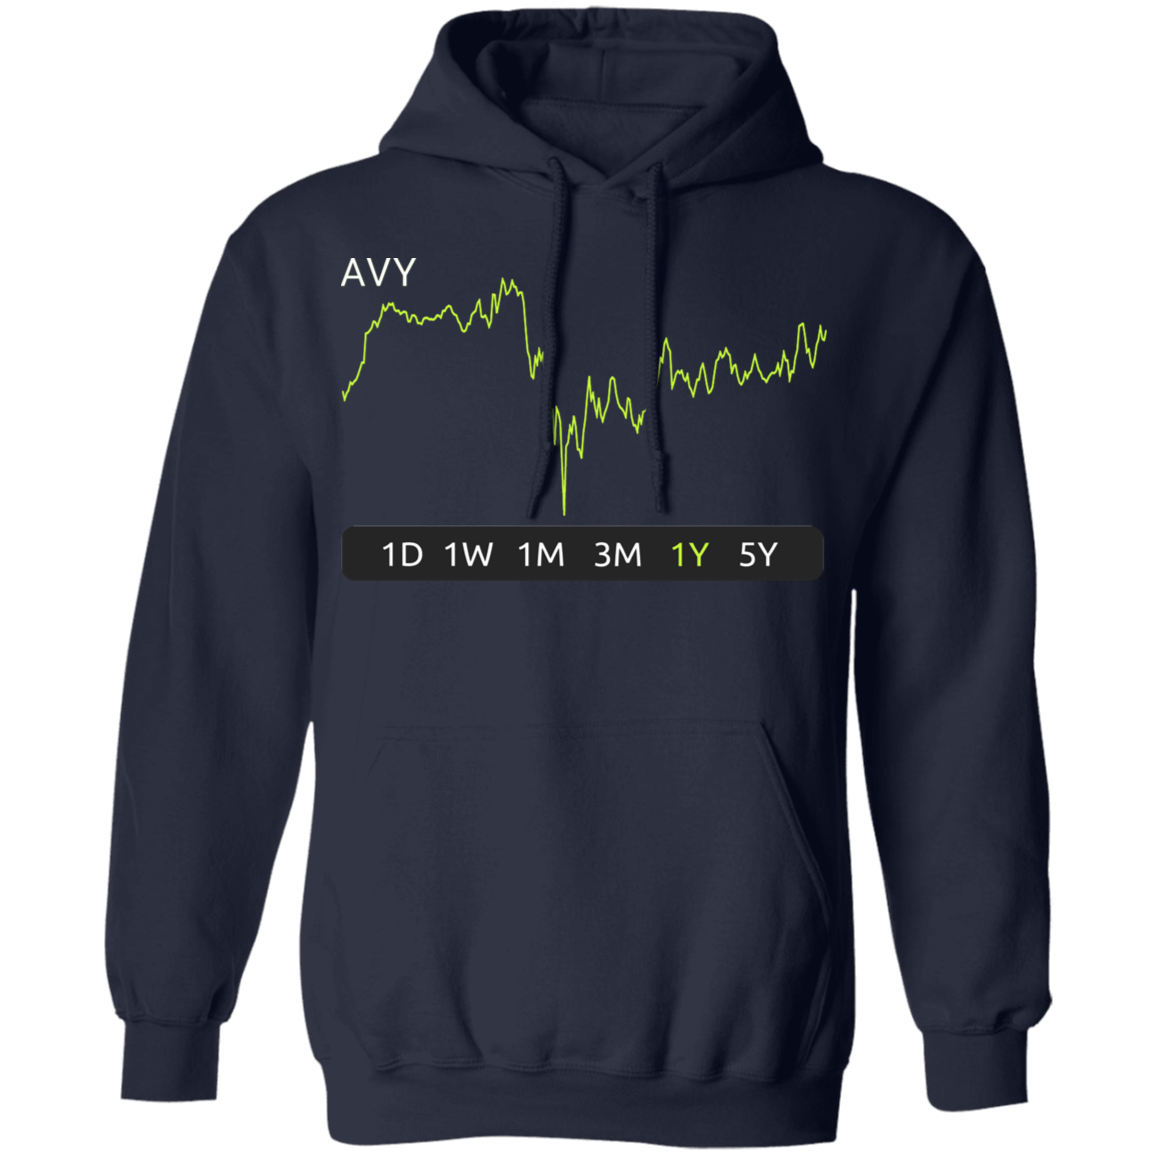 AVY Stock 1y Pullover Hoodie